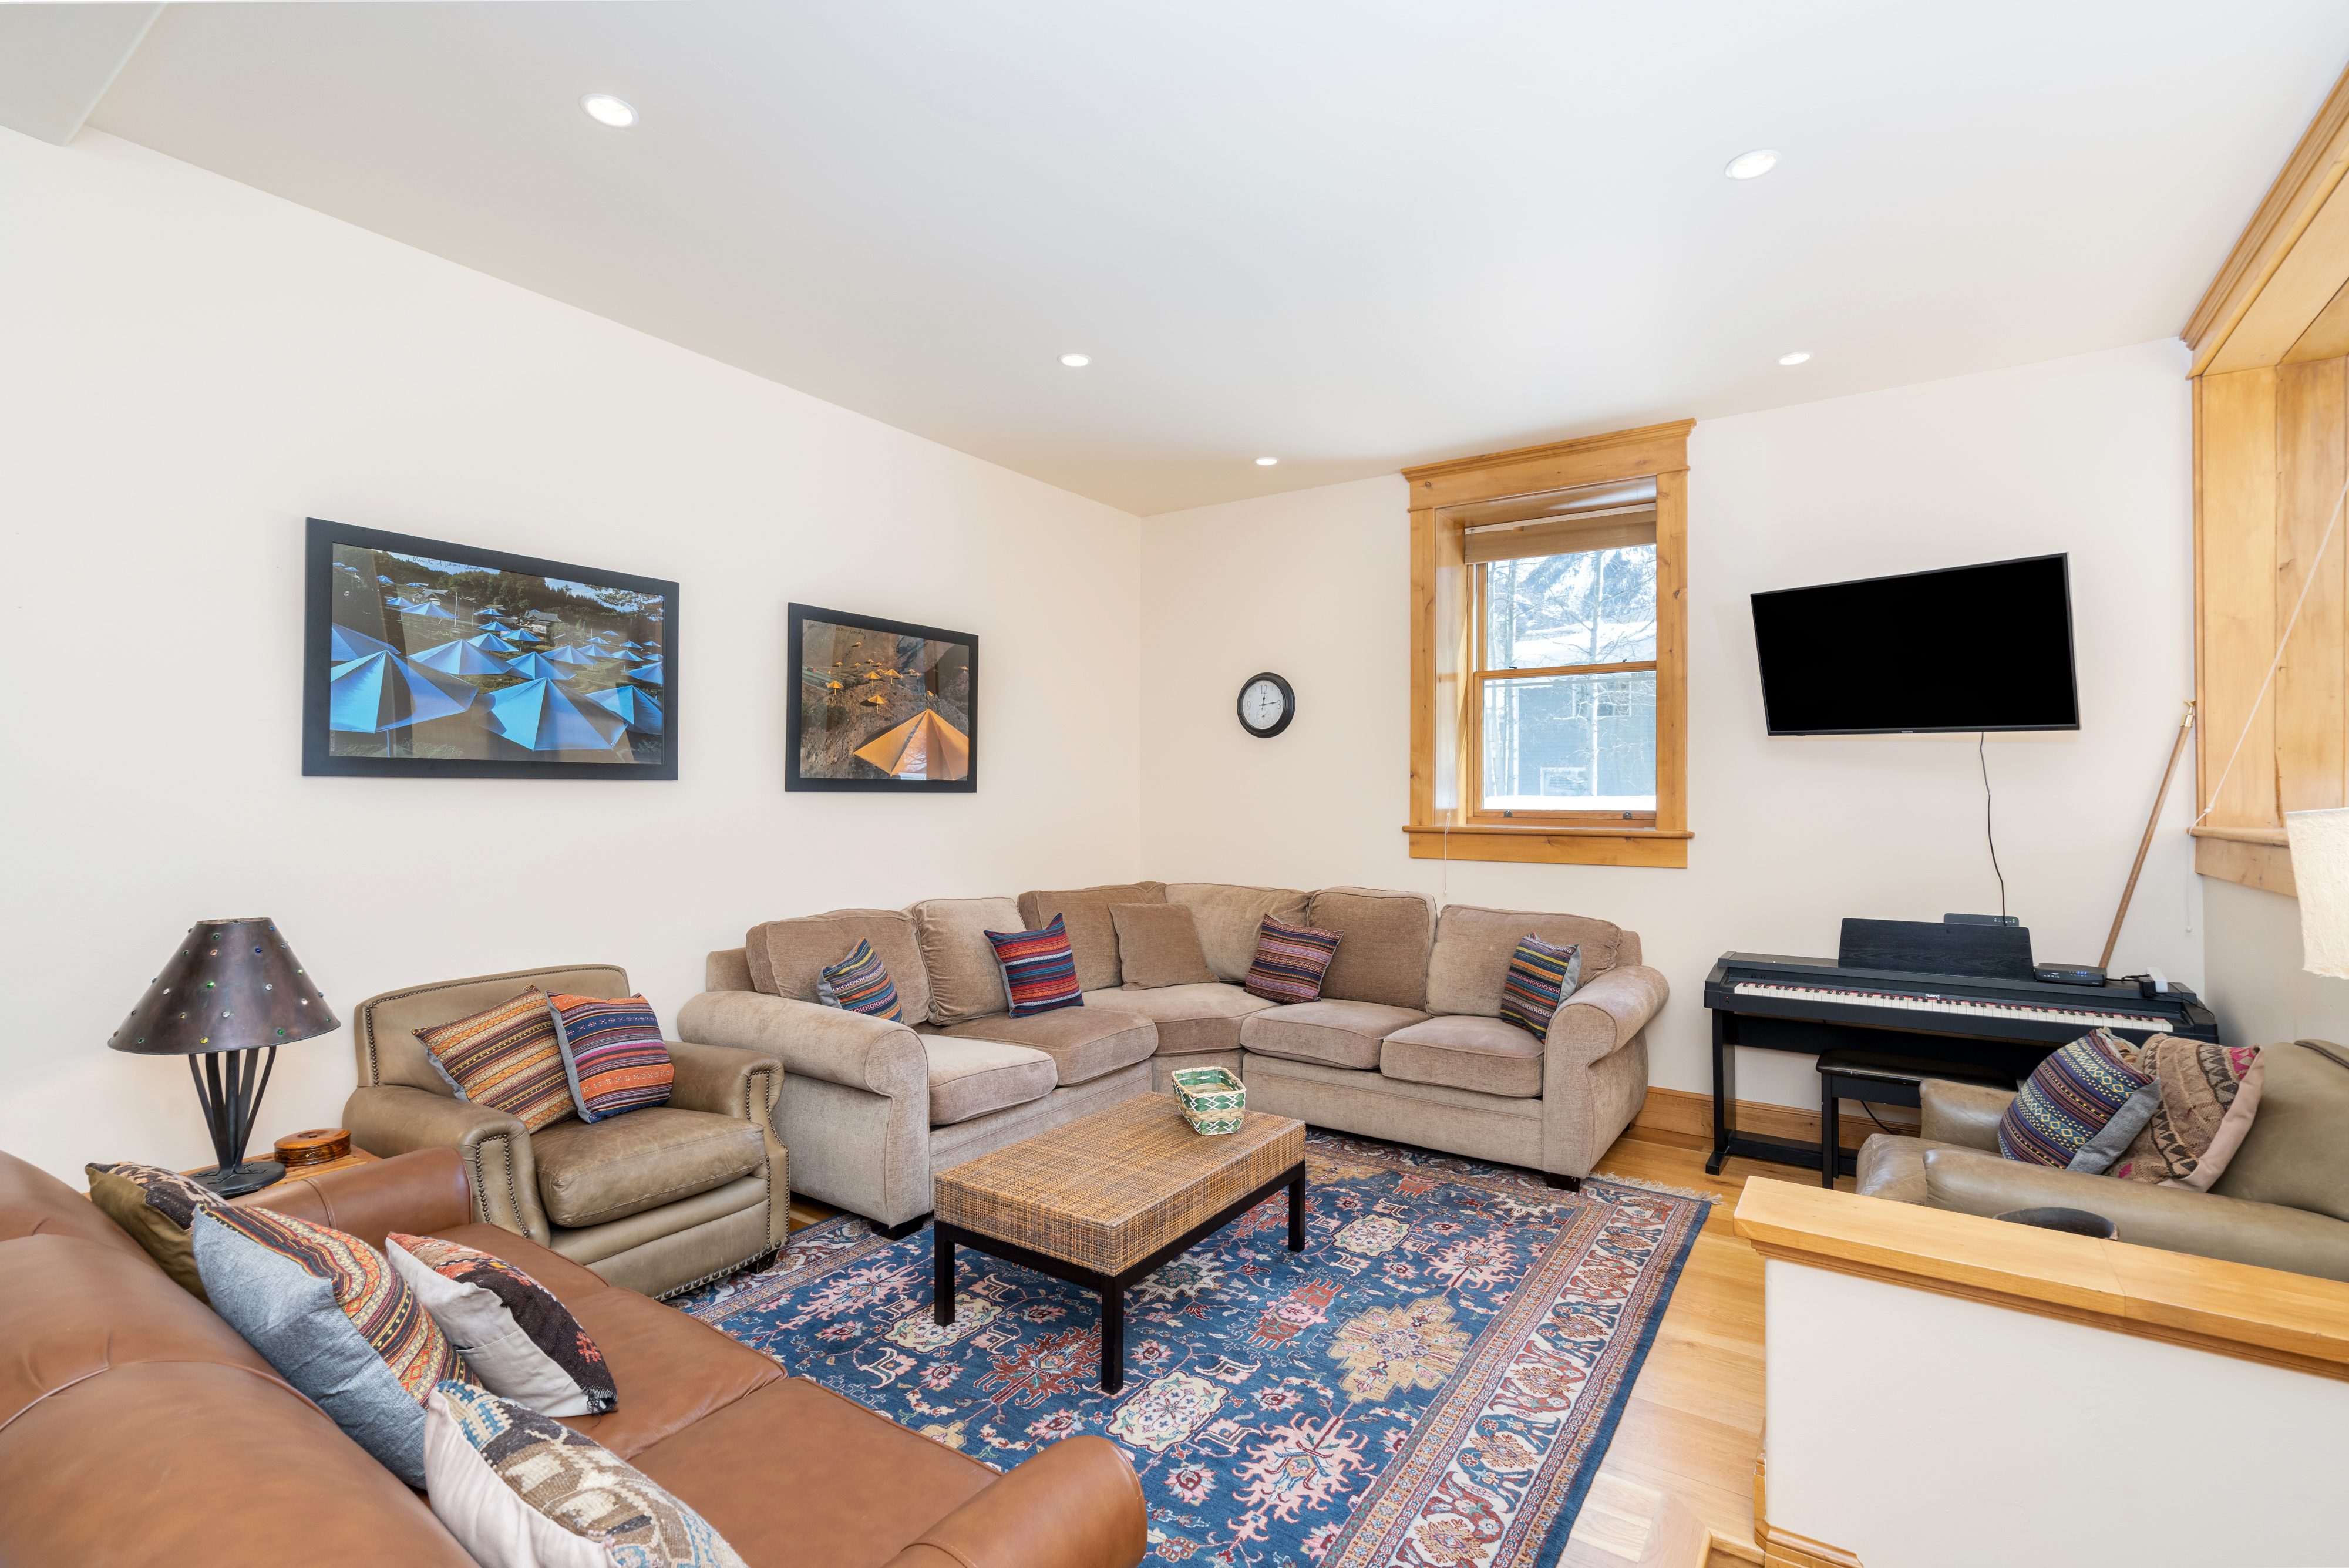 Large living room area in our Telluride vacation rental